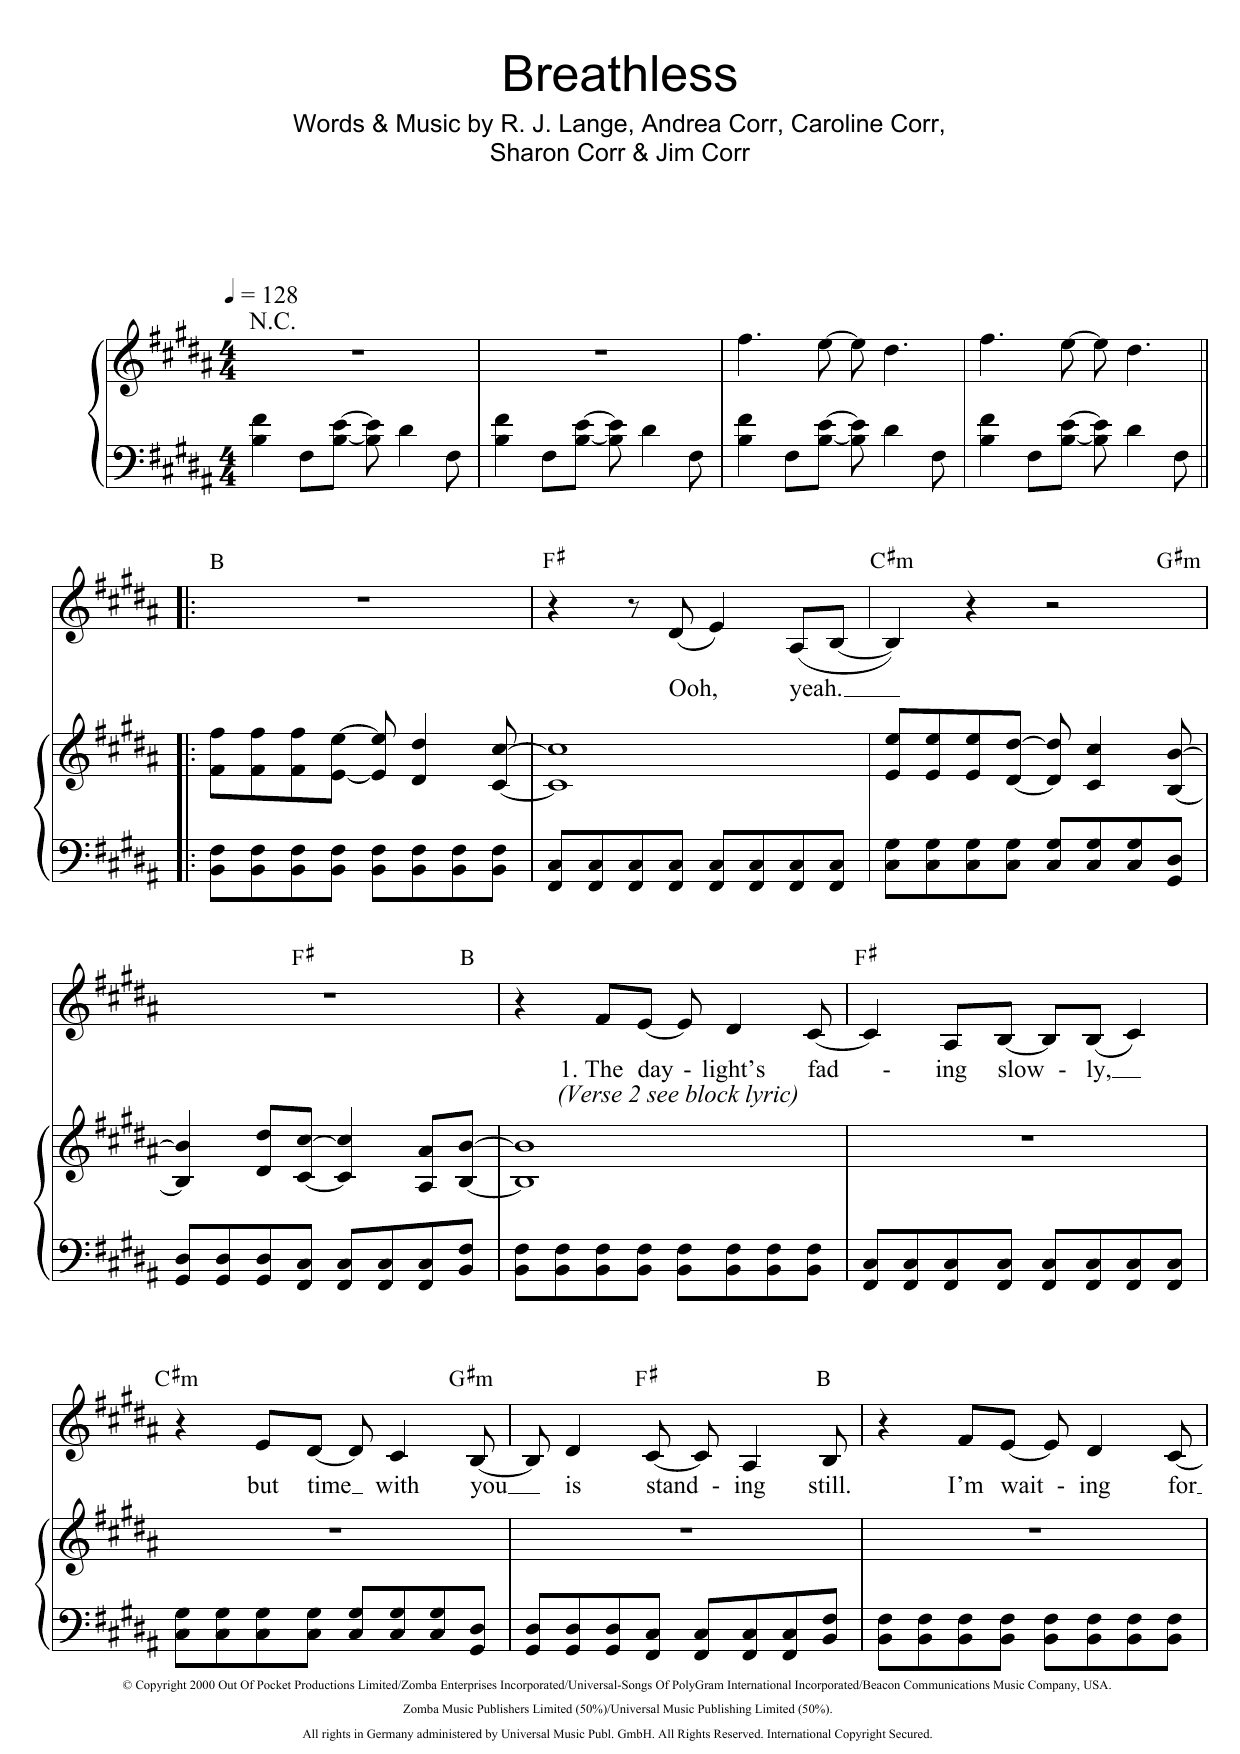 Download The Corrs Breathless Sheet Music